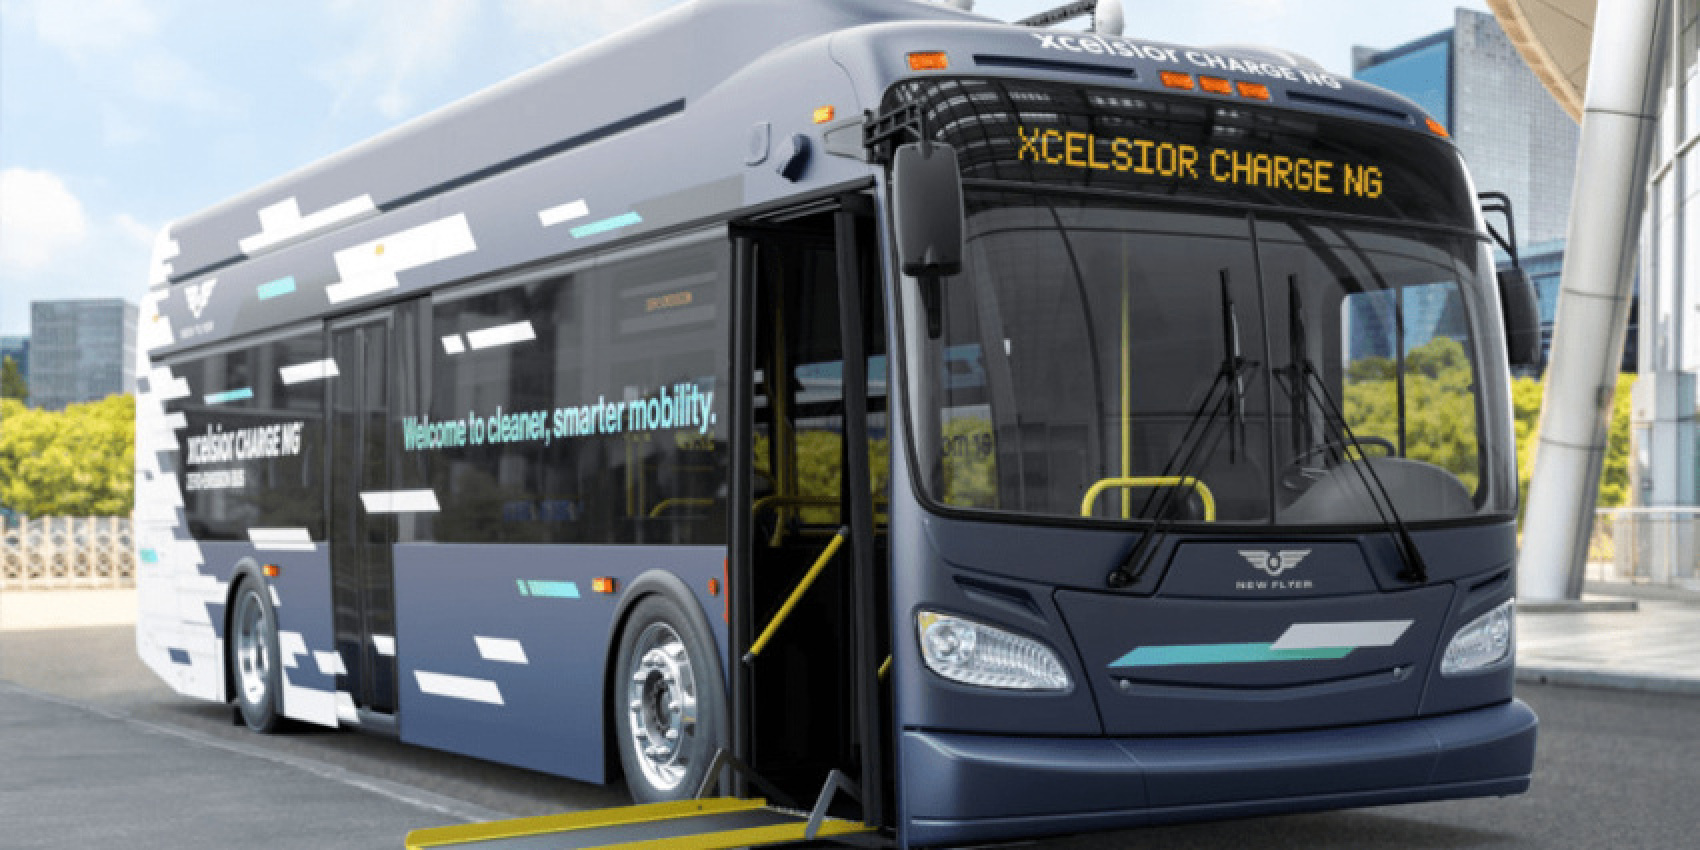 autos, cars, electric vehicle, fleets, electric buses, new flyer, new jersey, new york, nj transit, philadelphia, public transport, new jersey to be graced with 8 new flyer e-buses with options for more